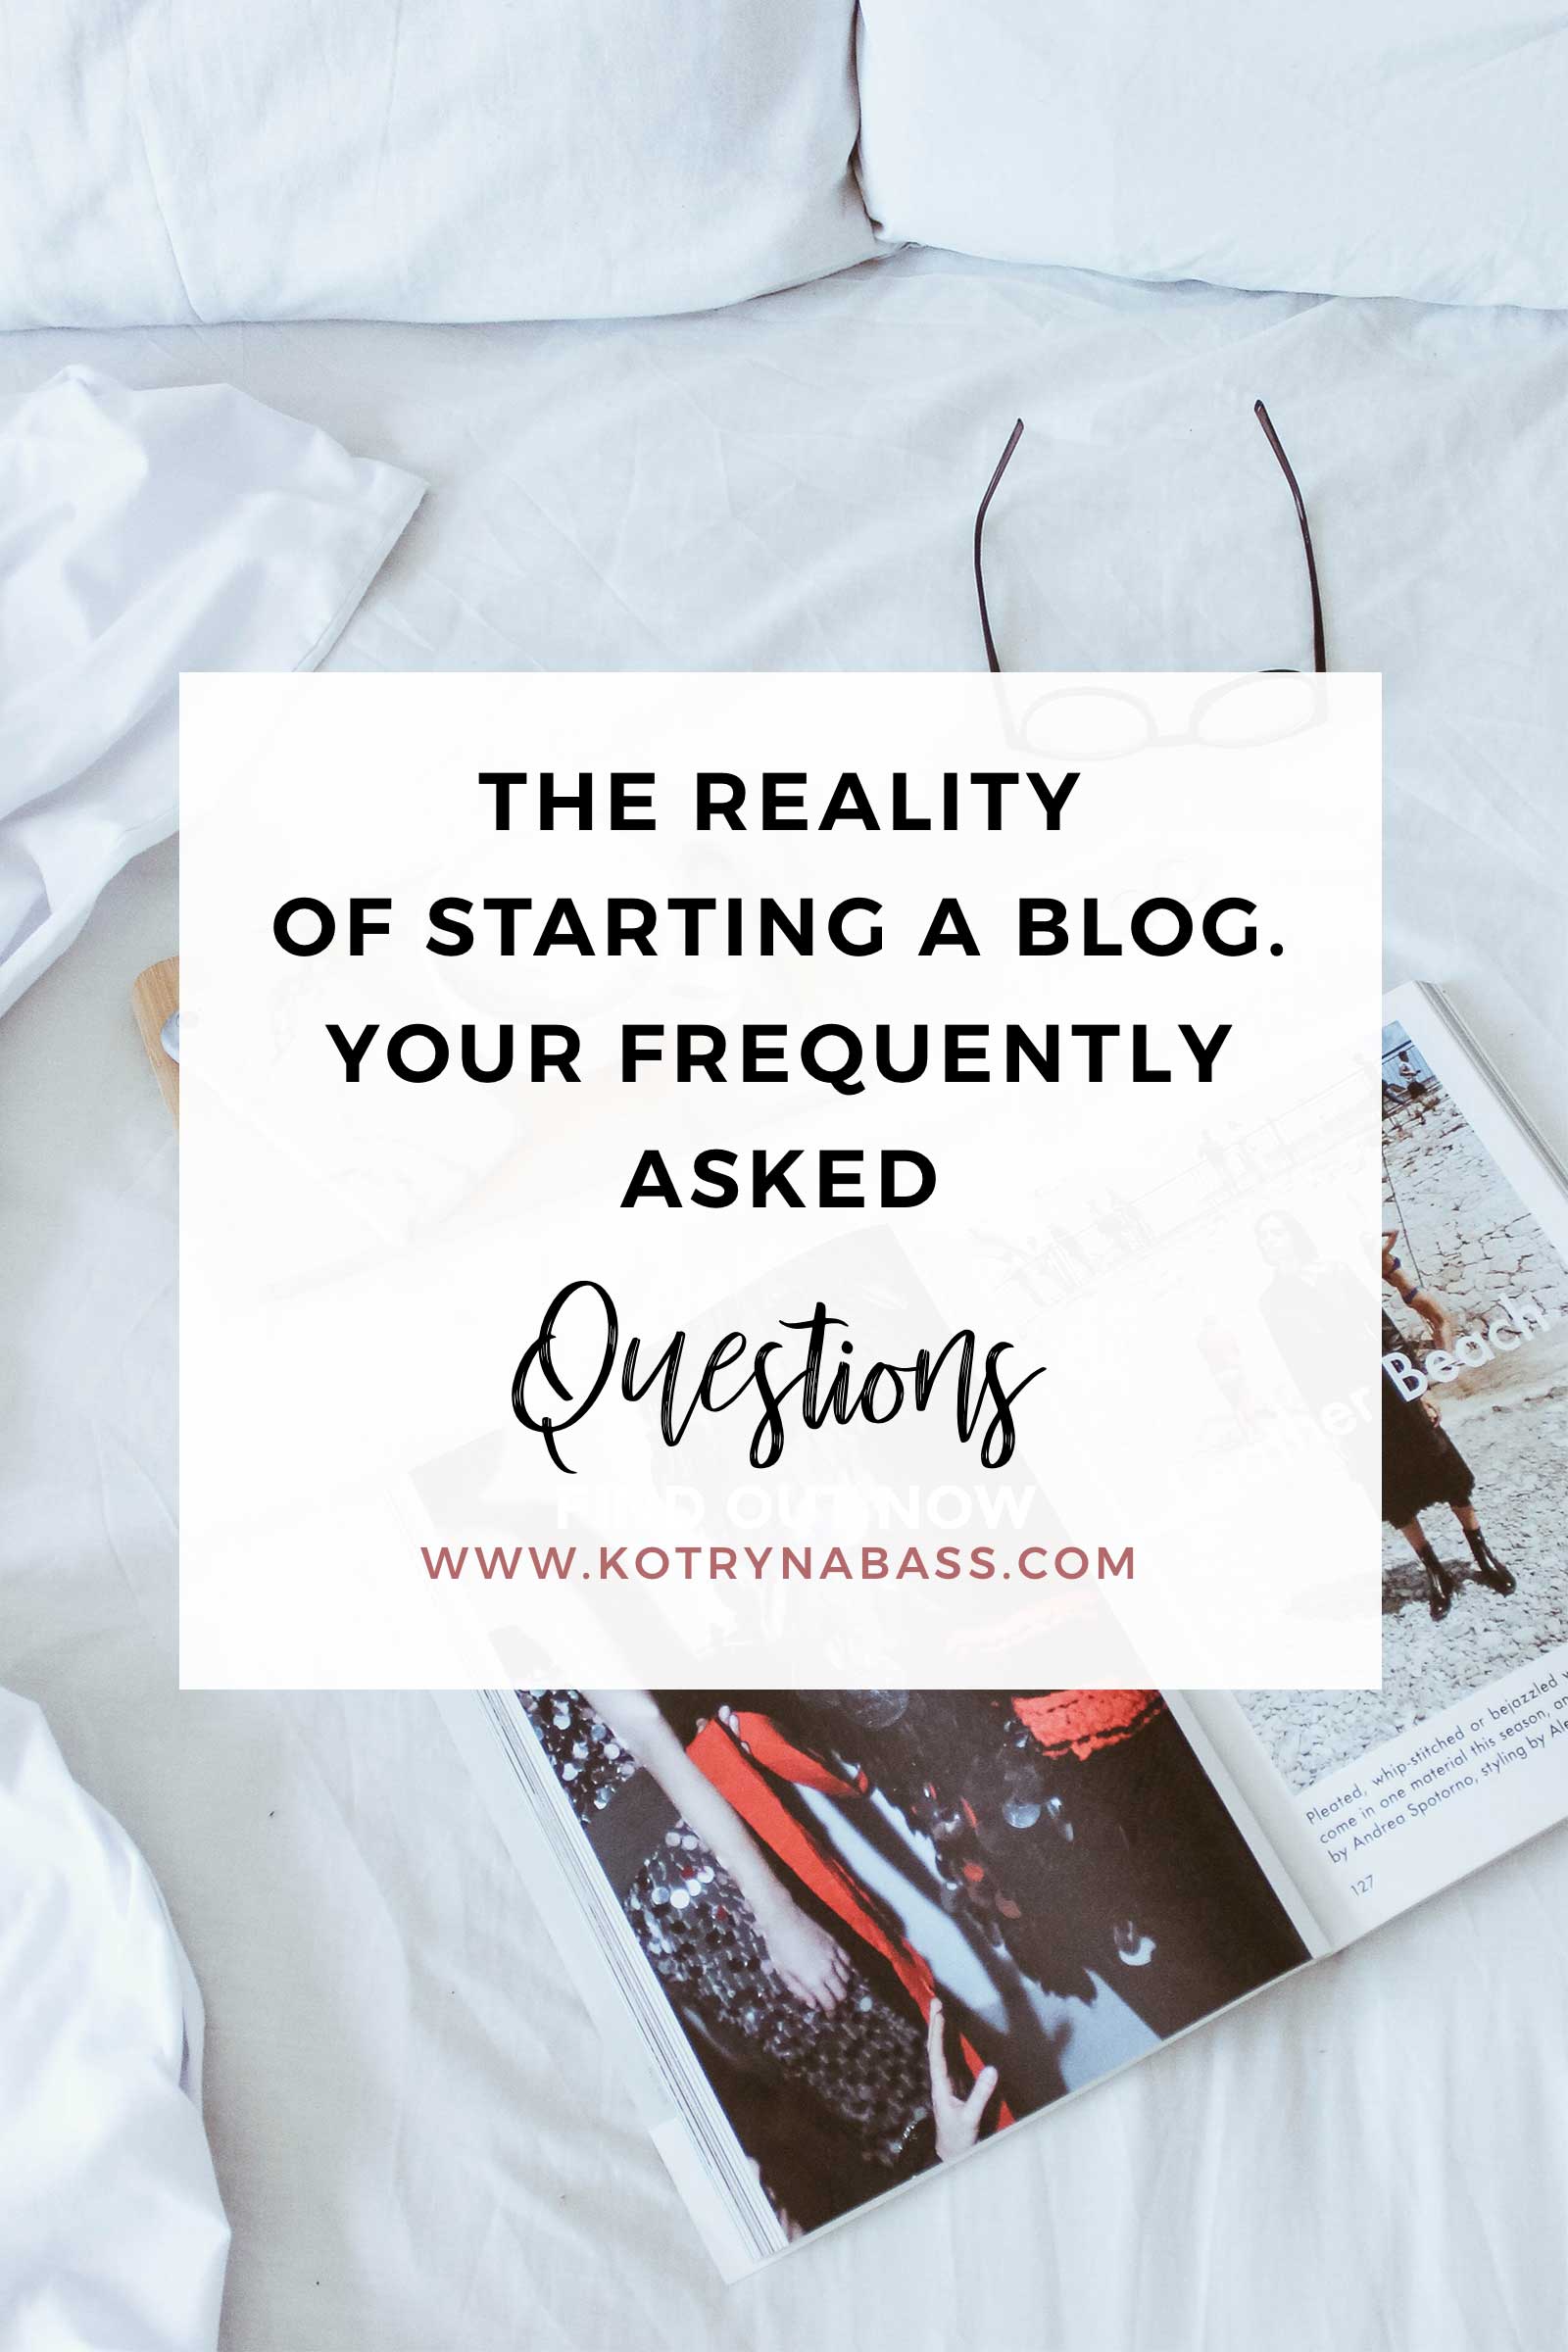 Blogging has been in our lives for quite a while now, but it still raises so many questions. I get e-mails from people wanting to start their blogs on the daily bases and by now, I'm pretty much aware of the general concerns you might be having. In this post, I answer some of your most frequently asked questions and I really hope it will clear things up about the reality of starting a blog.